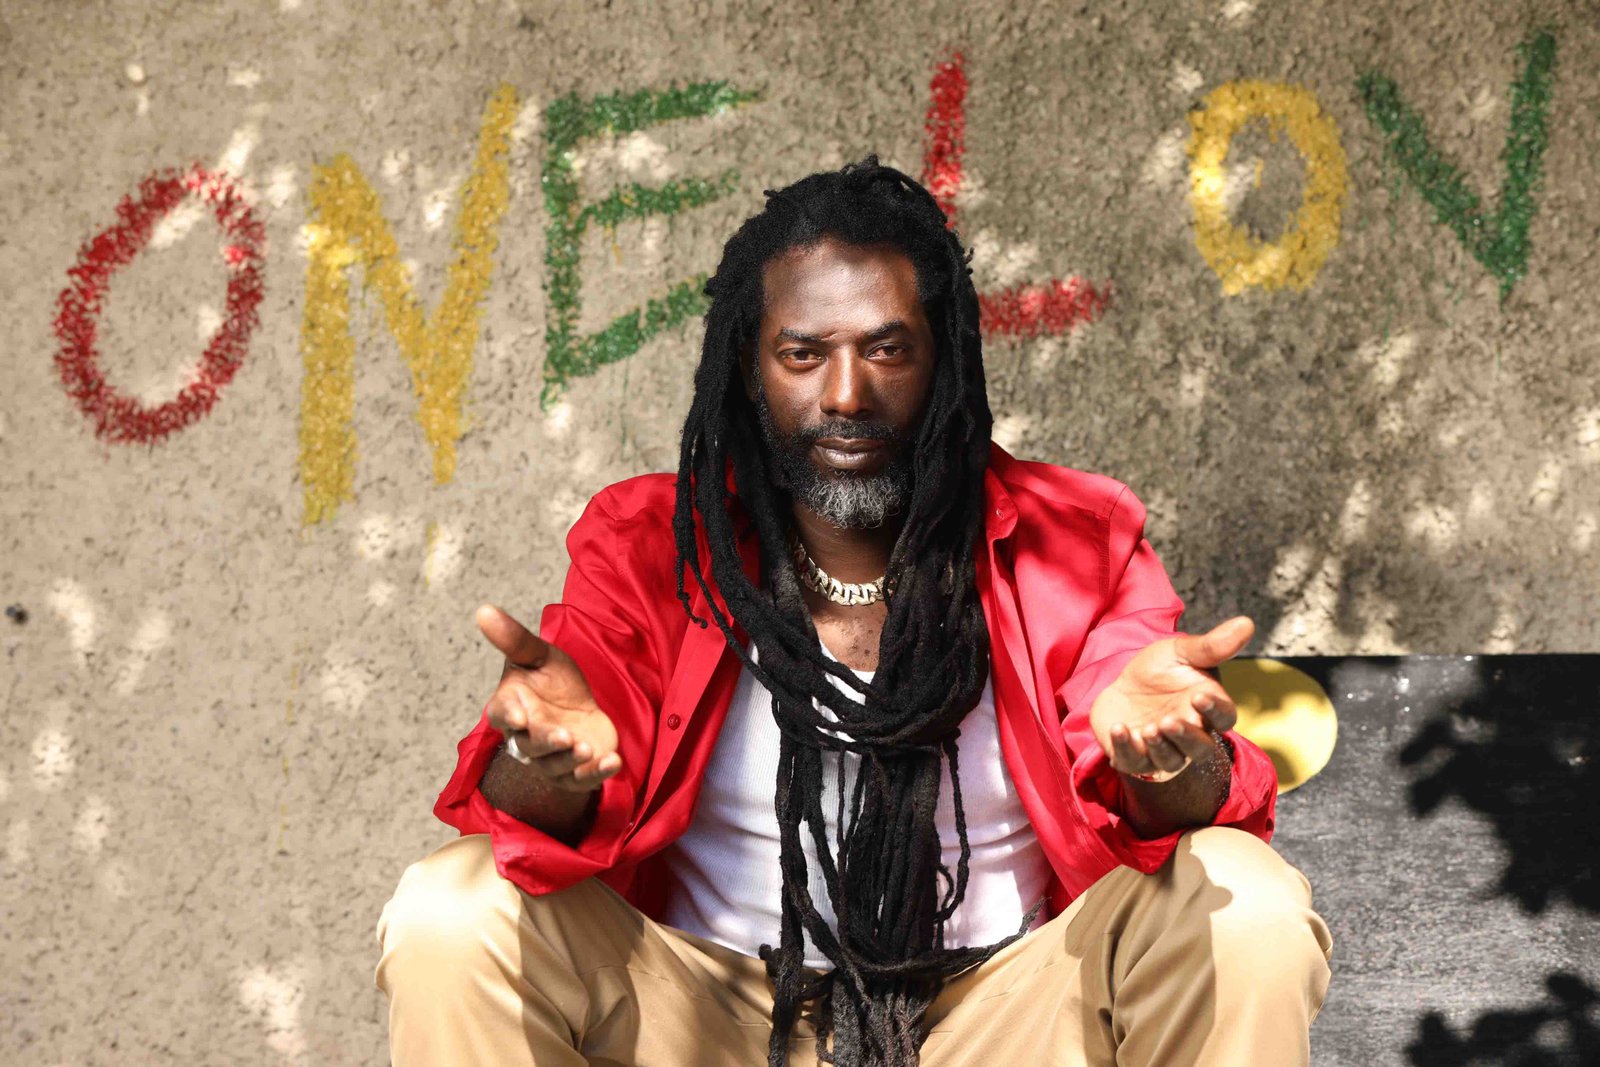 Buju Banton All Access tickets sold out Eye Witness News